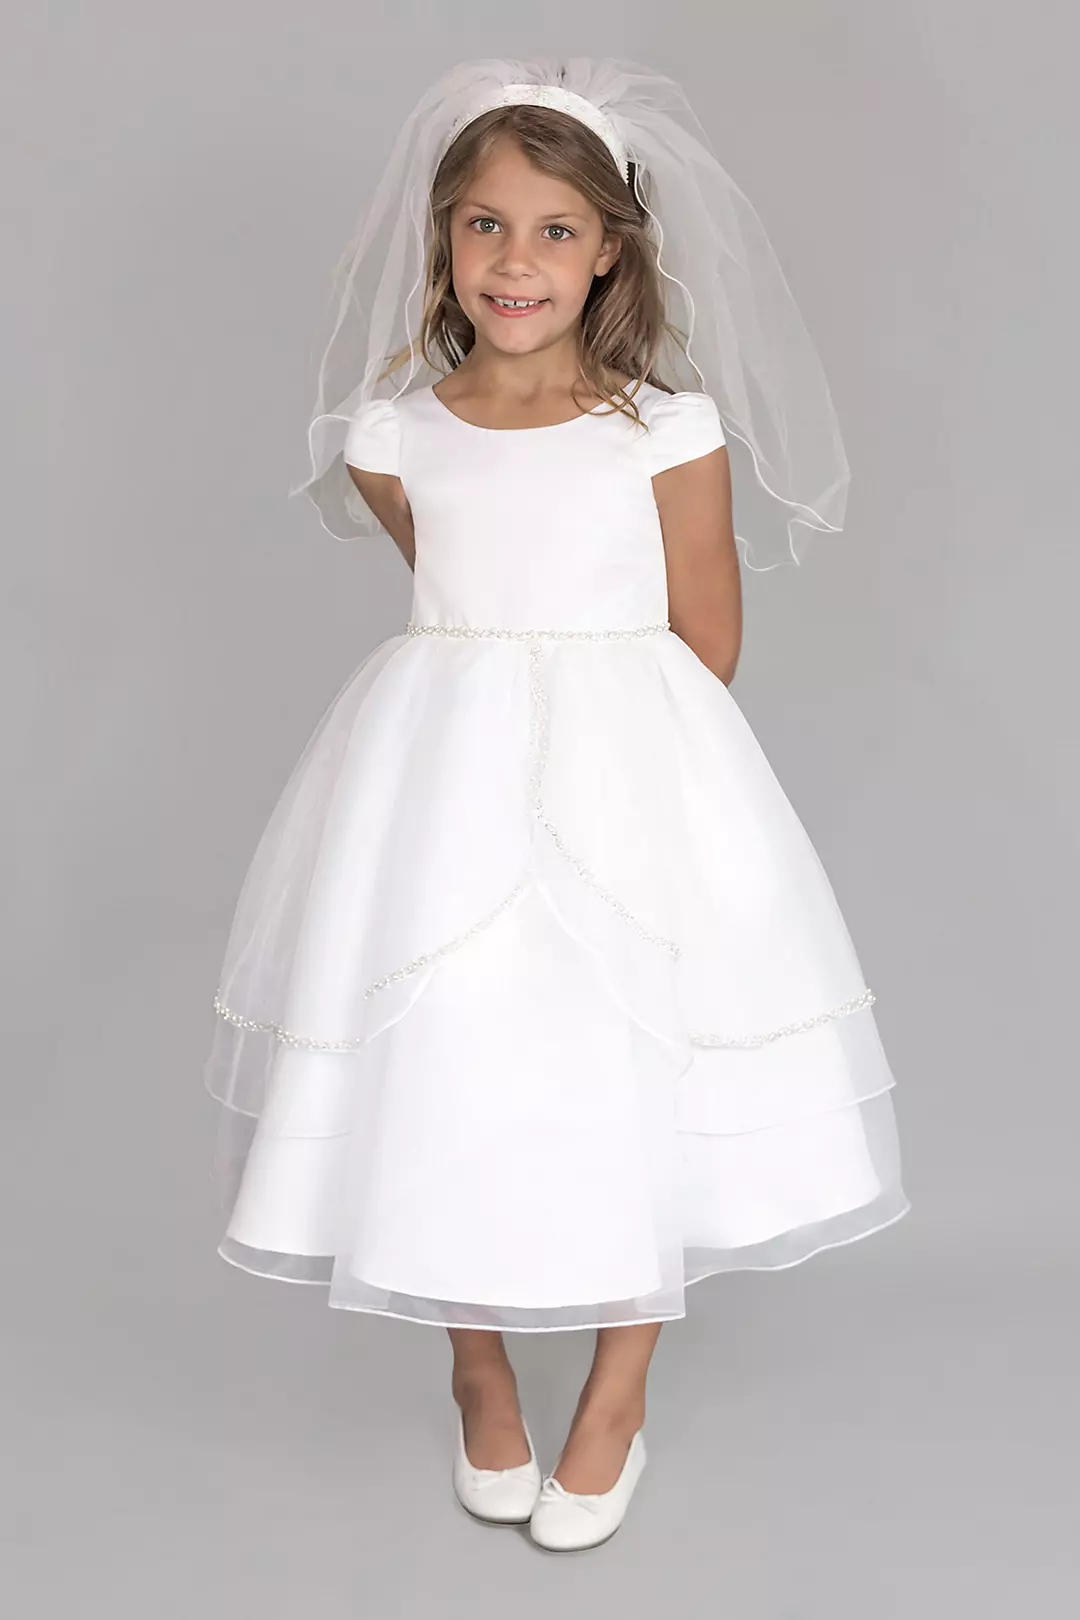 Satin and Tulle Cap Sleeve Communion Dress Image